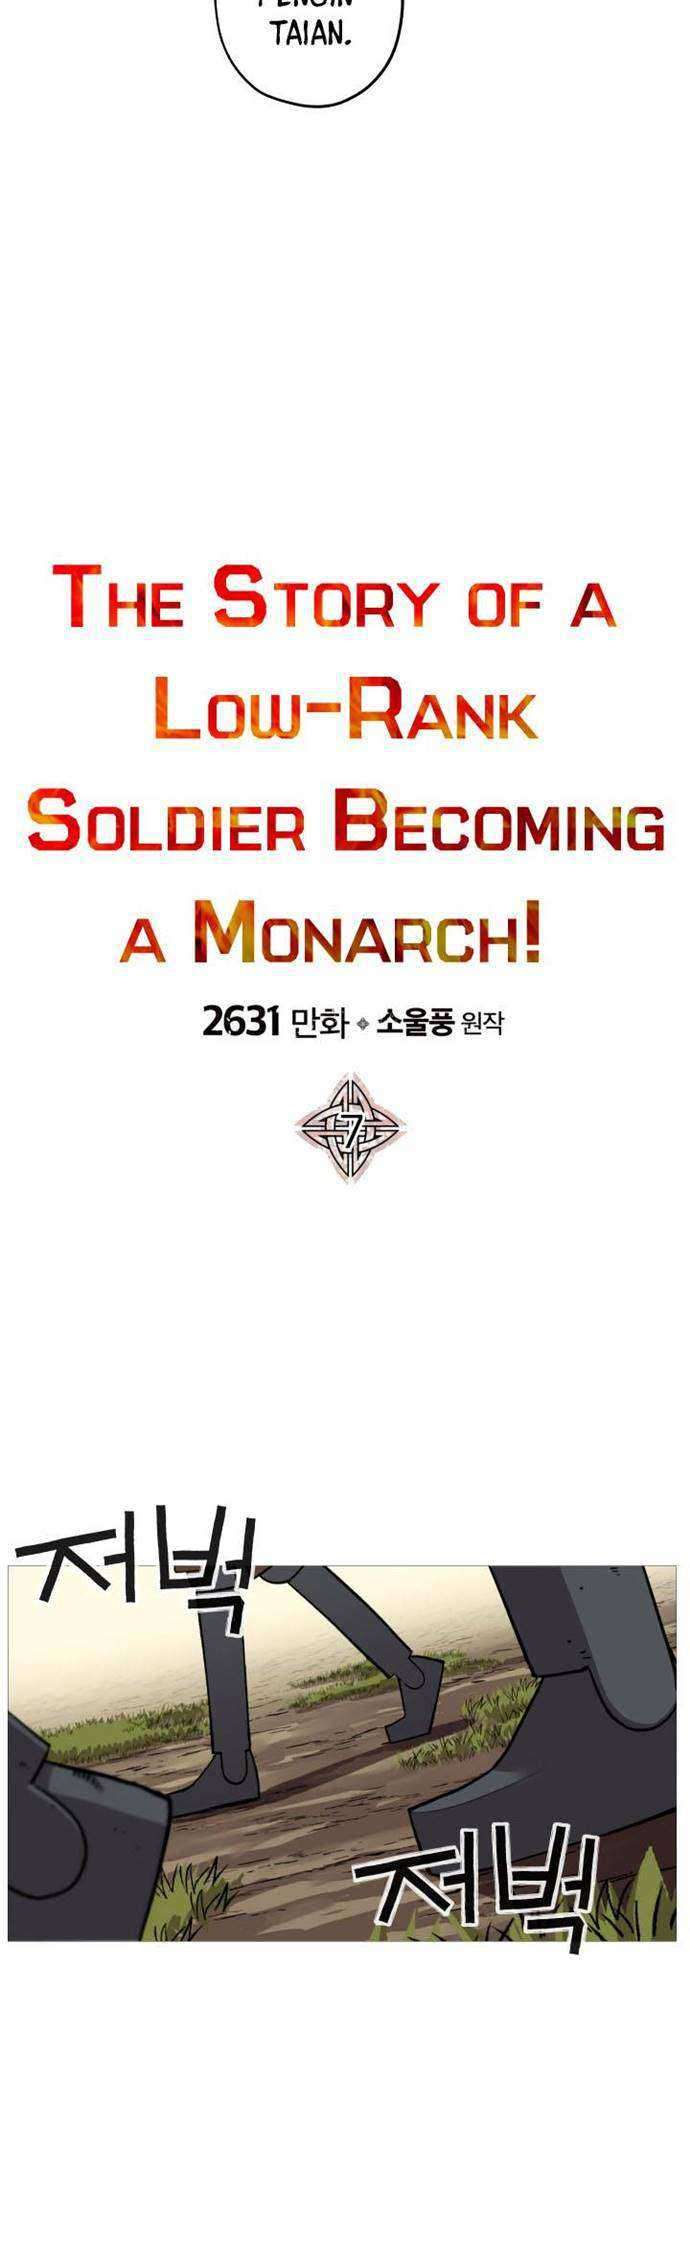 The Story of a Low-Rank Soldier Becoming a Monarch Chapter 07 10